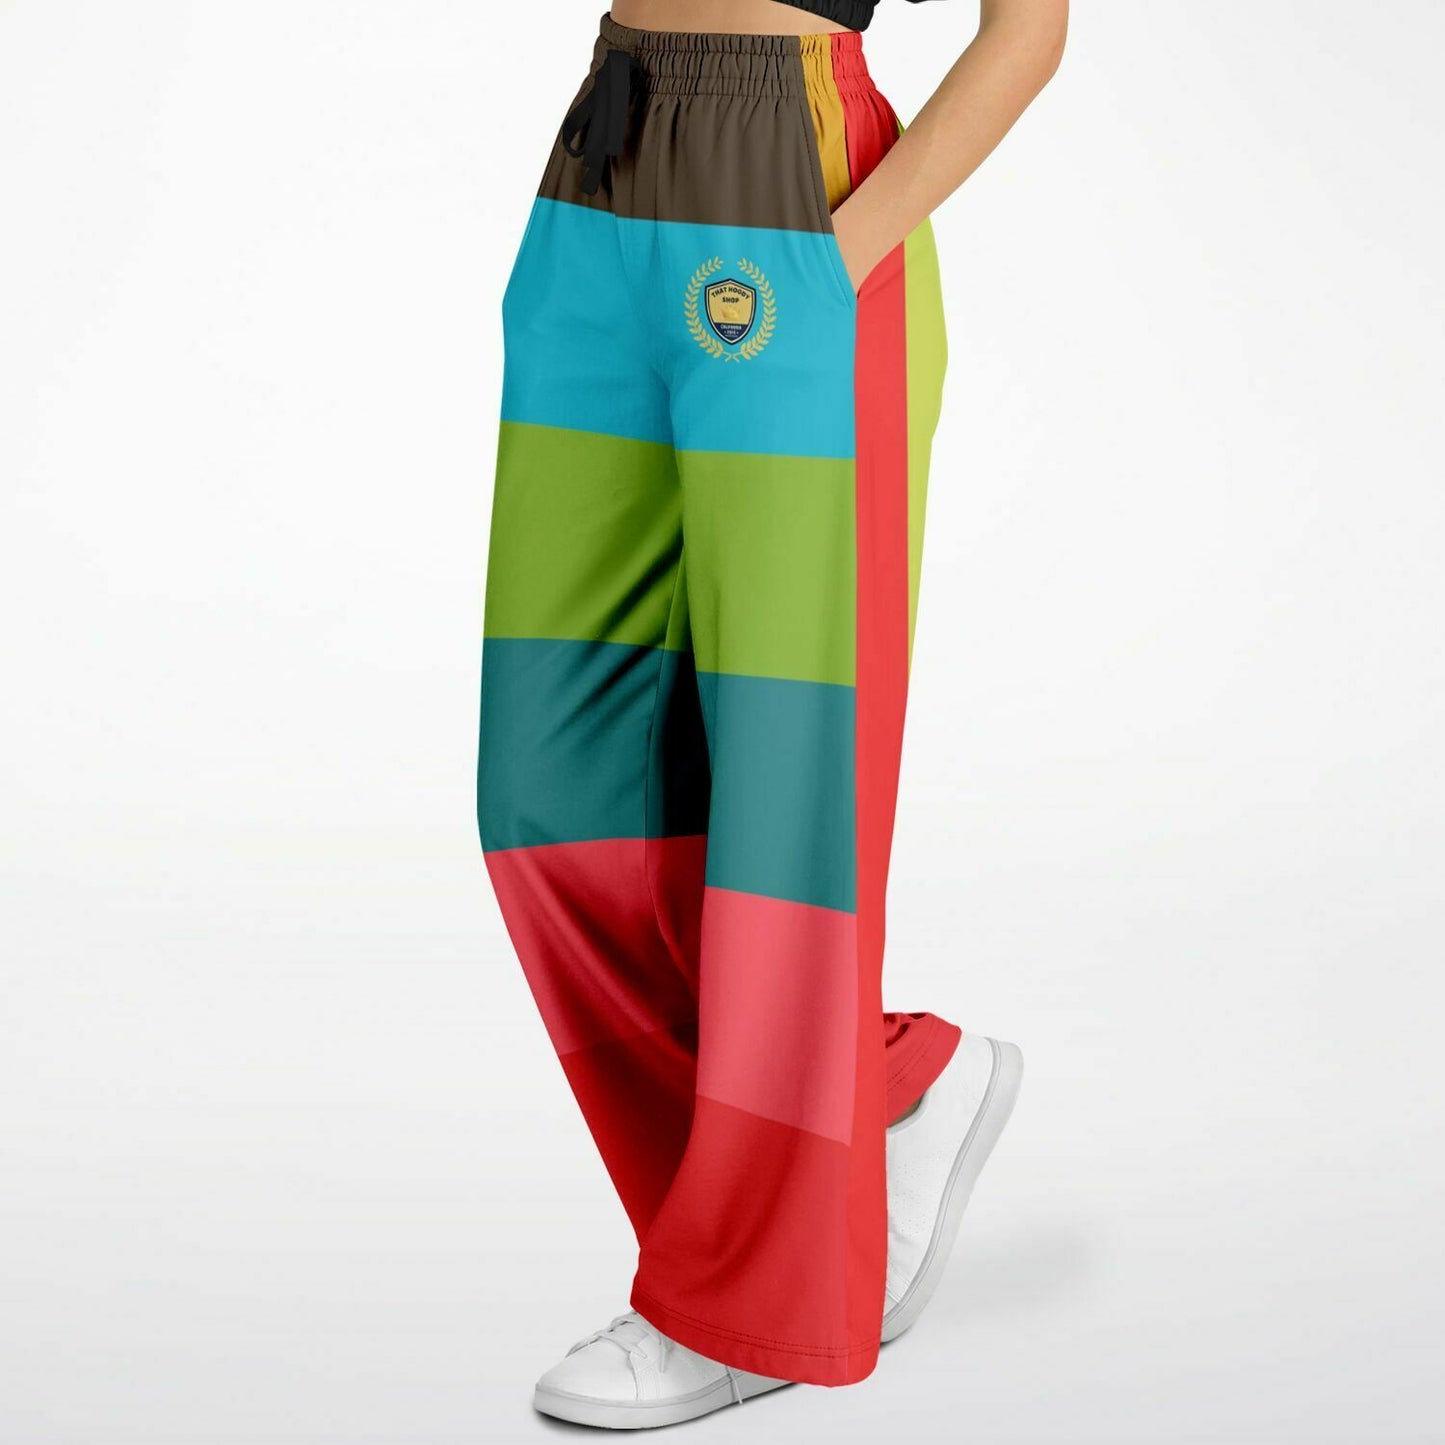 Watermelon Crush Rugby Stripe Eco-Poly Wide Leg Pants